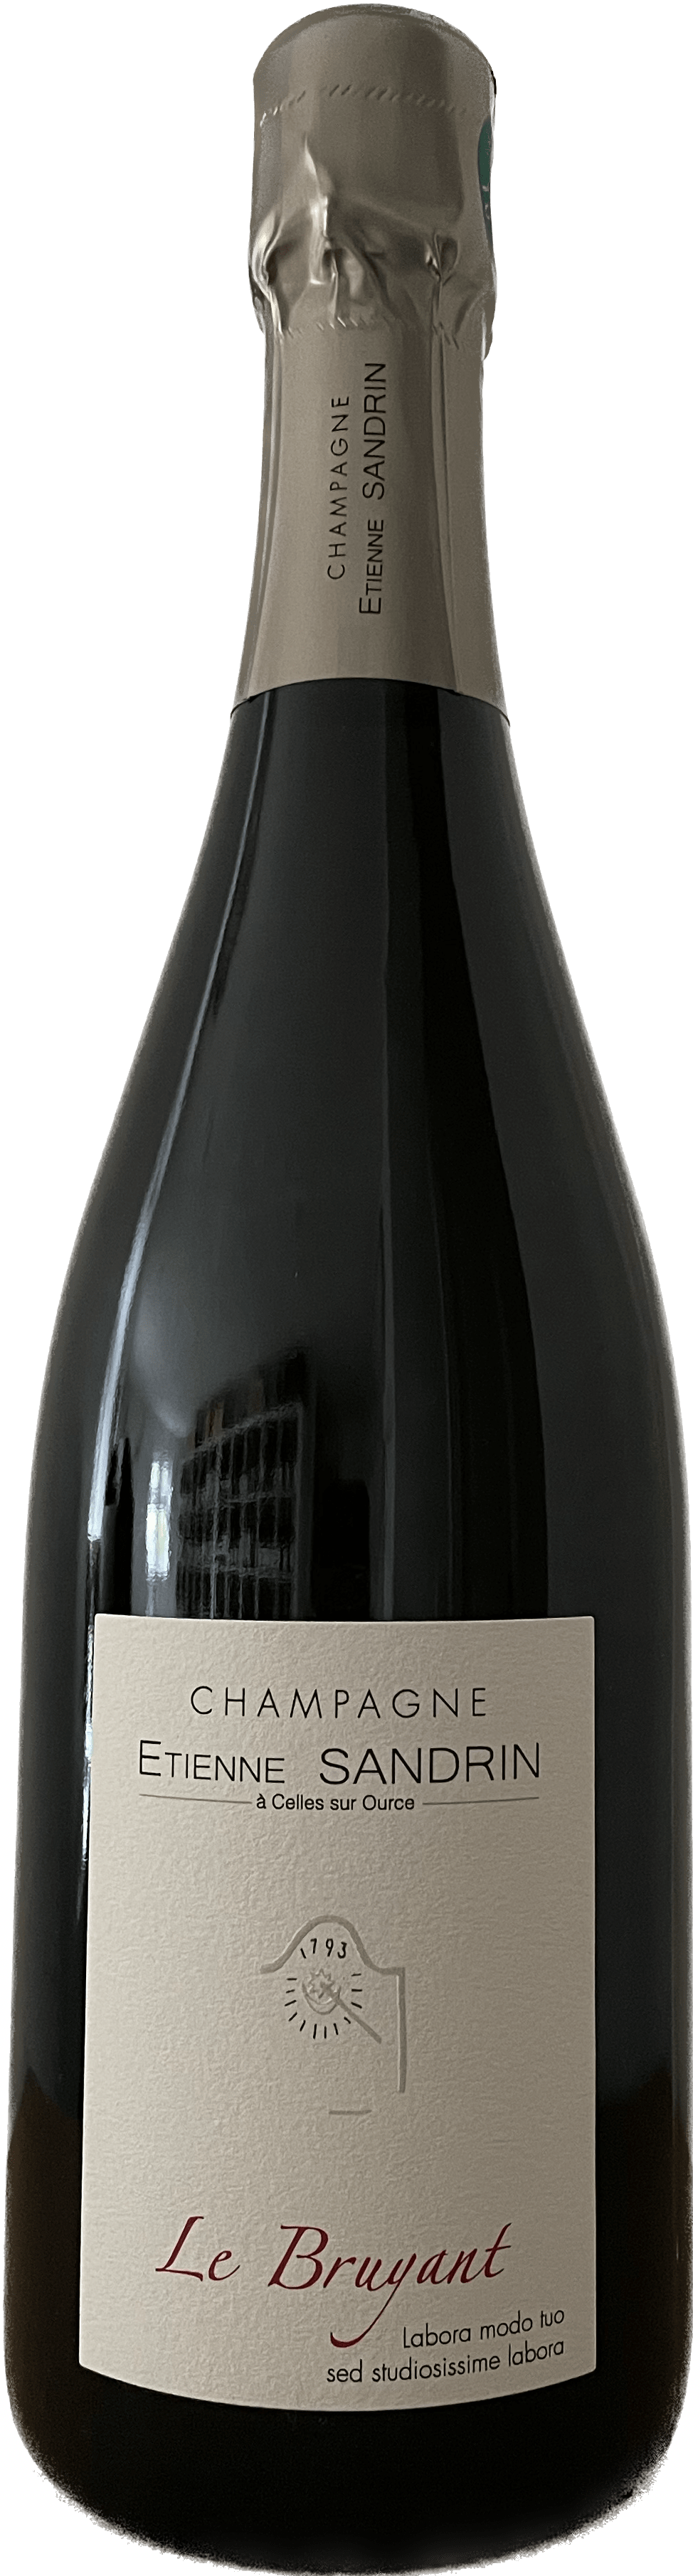 Champagne Etienne Sandrin Le Bruyant 2019